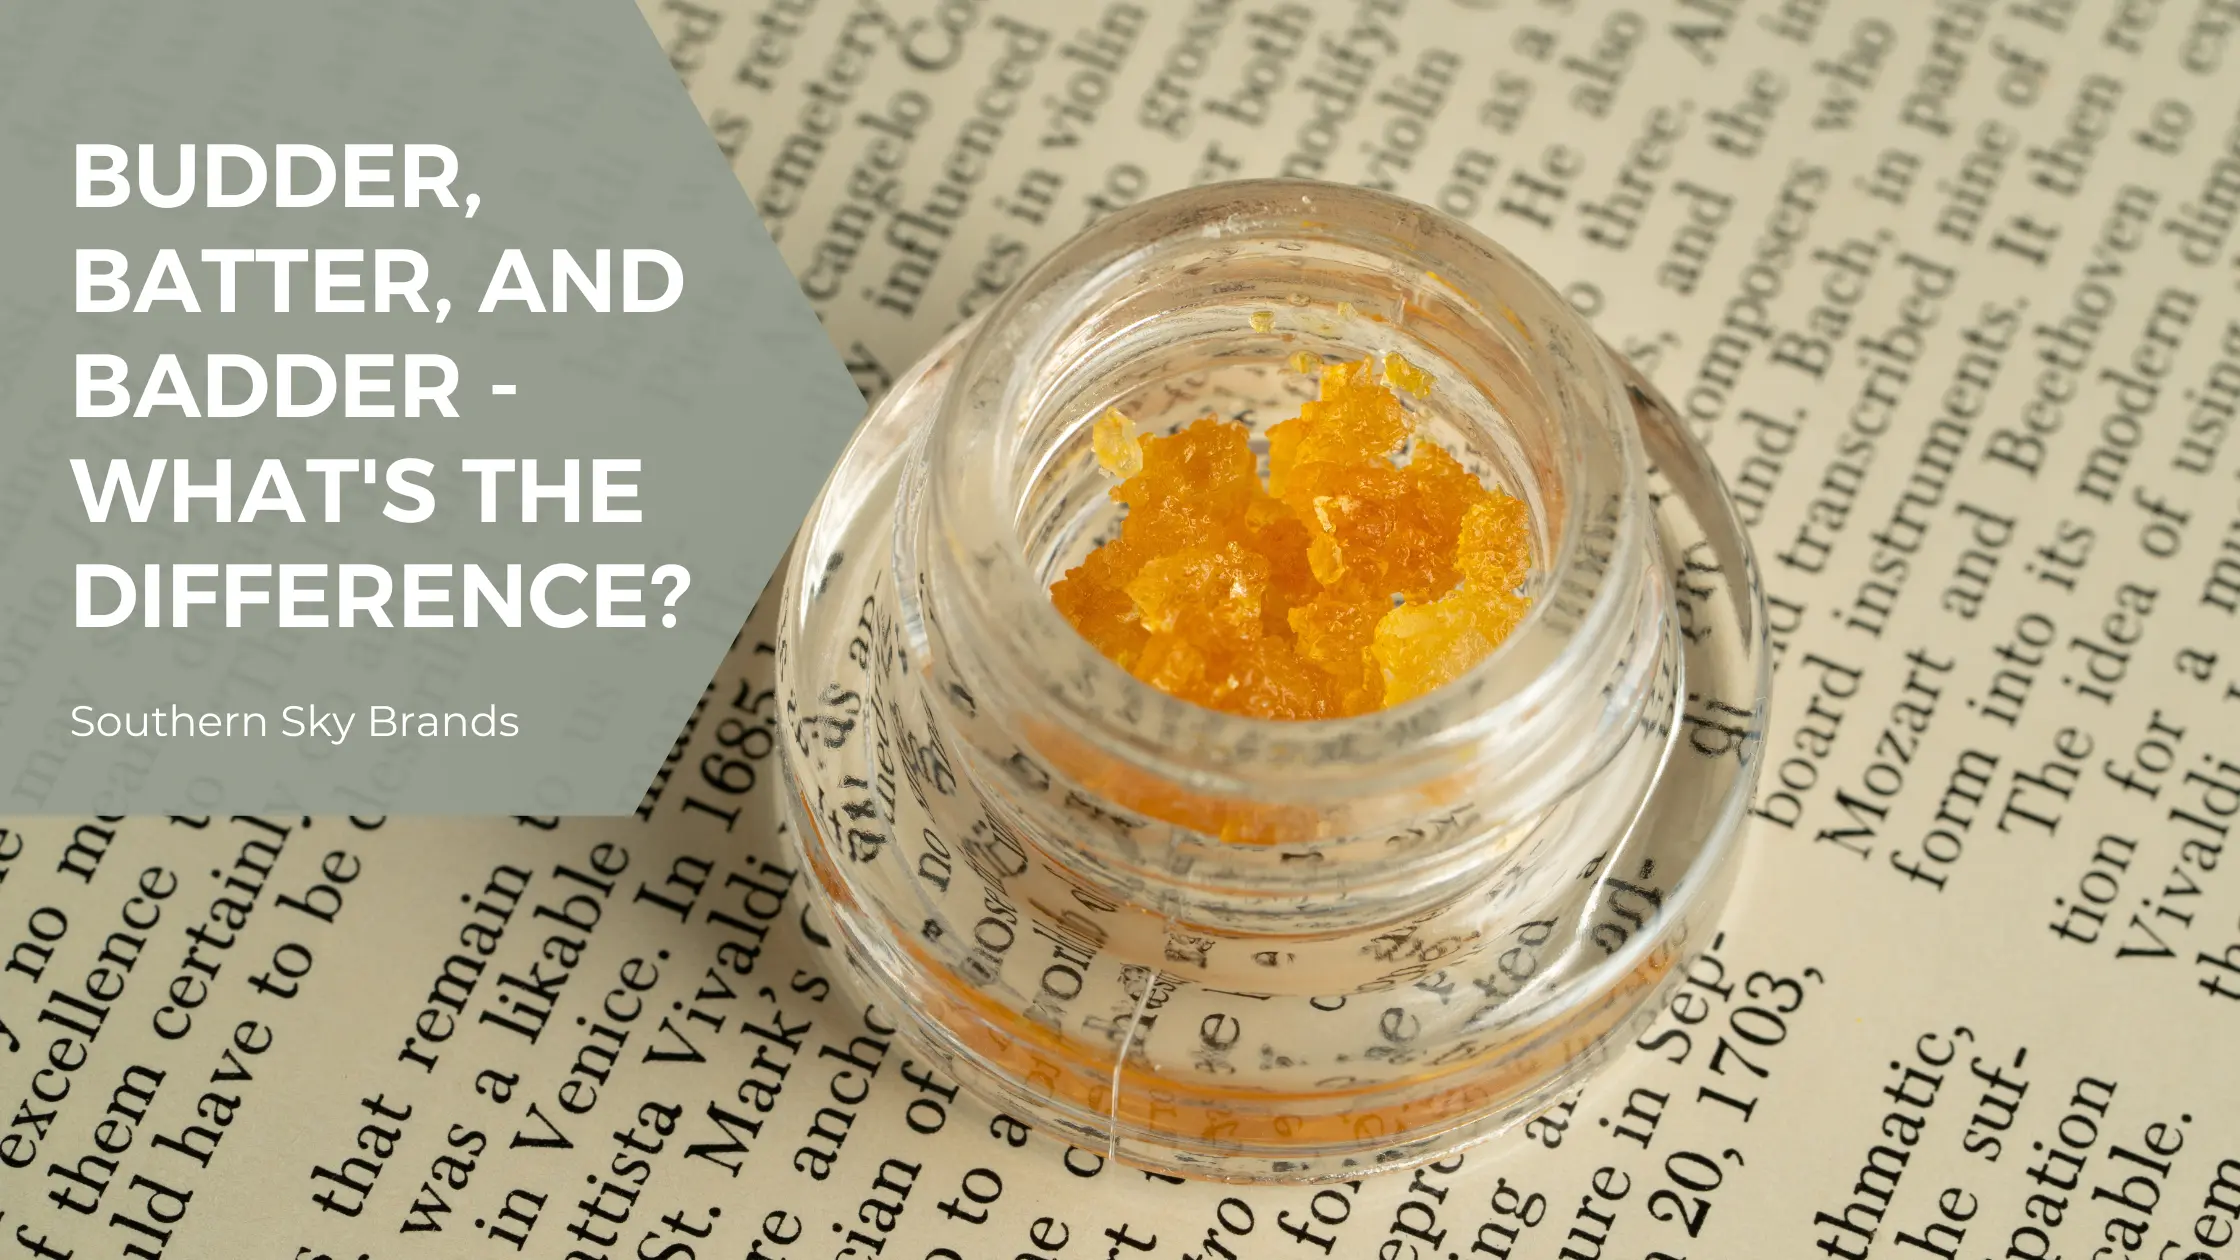 Budder, batter, and badder - what's the difference